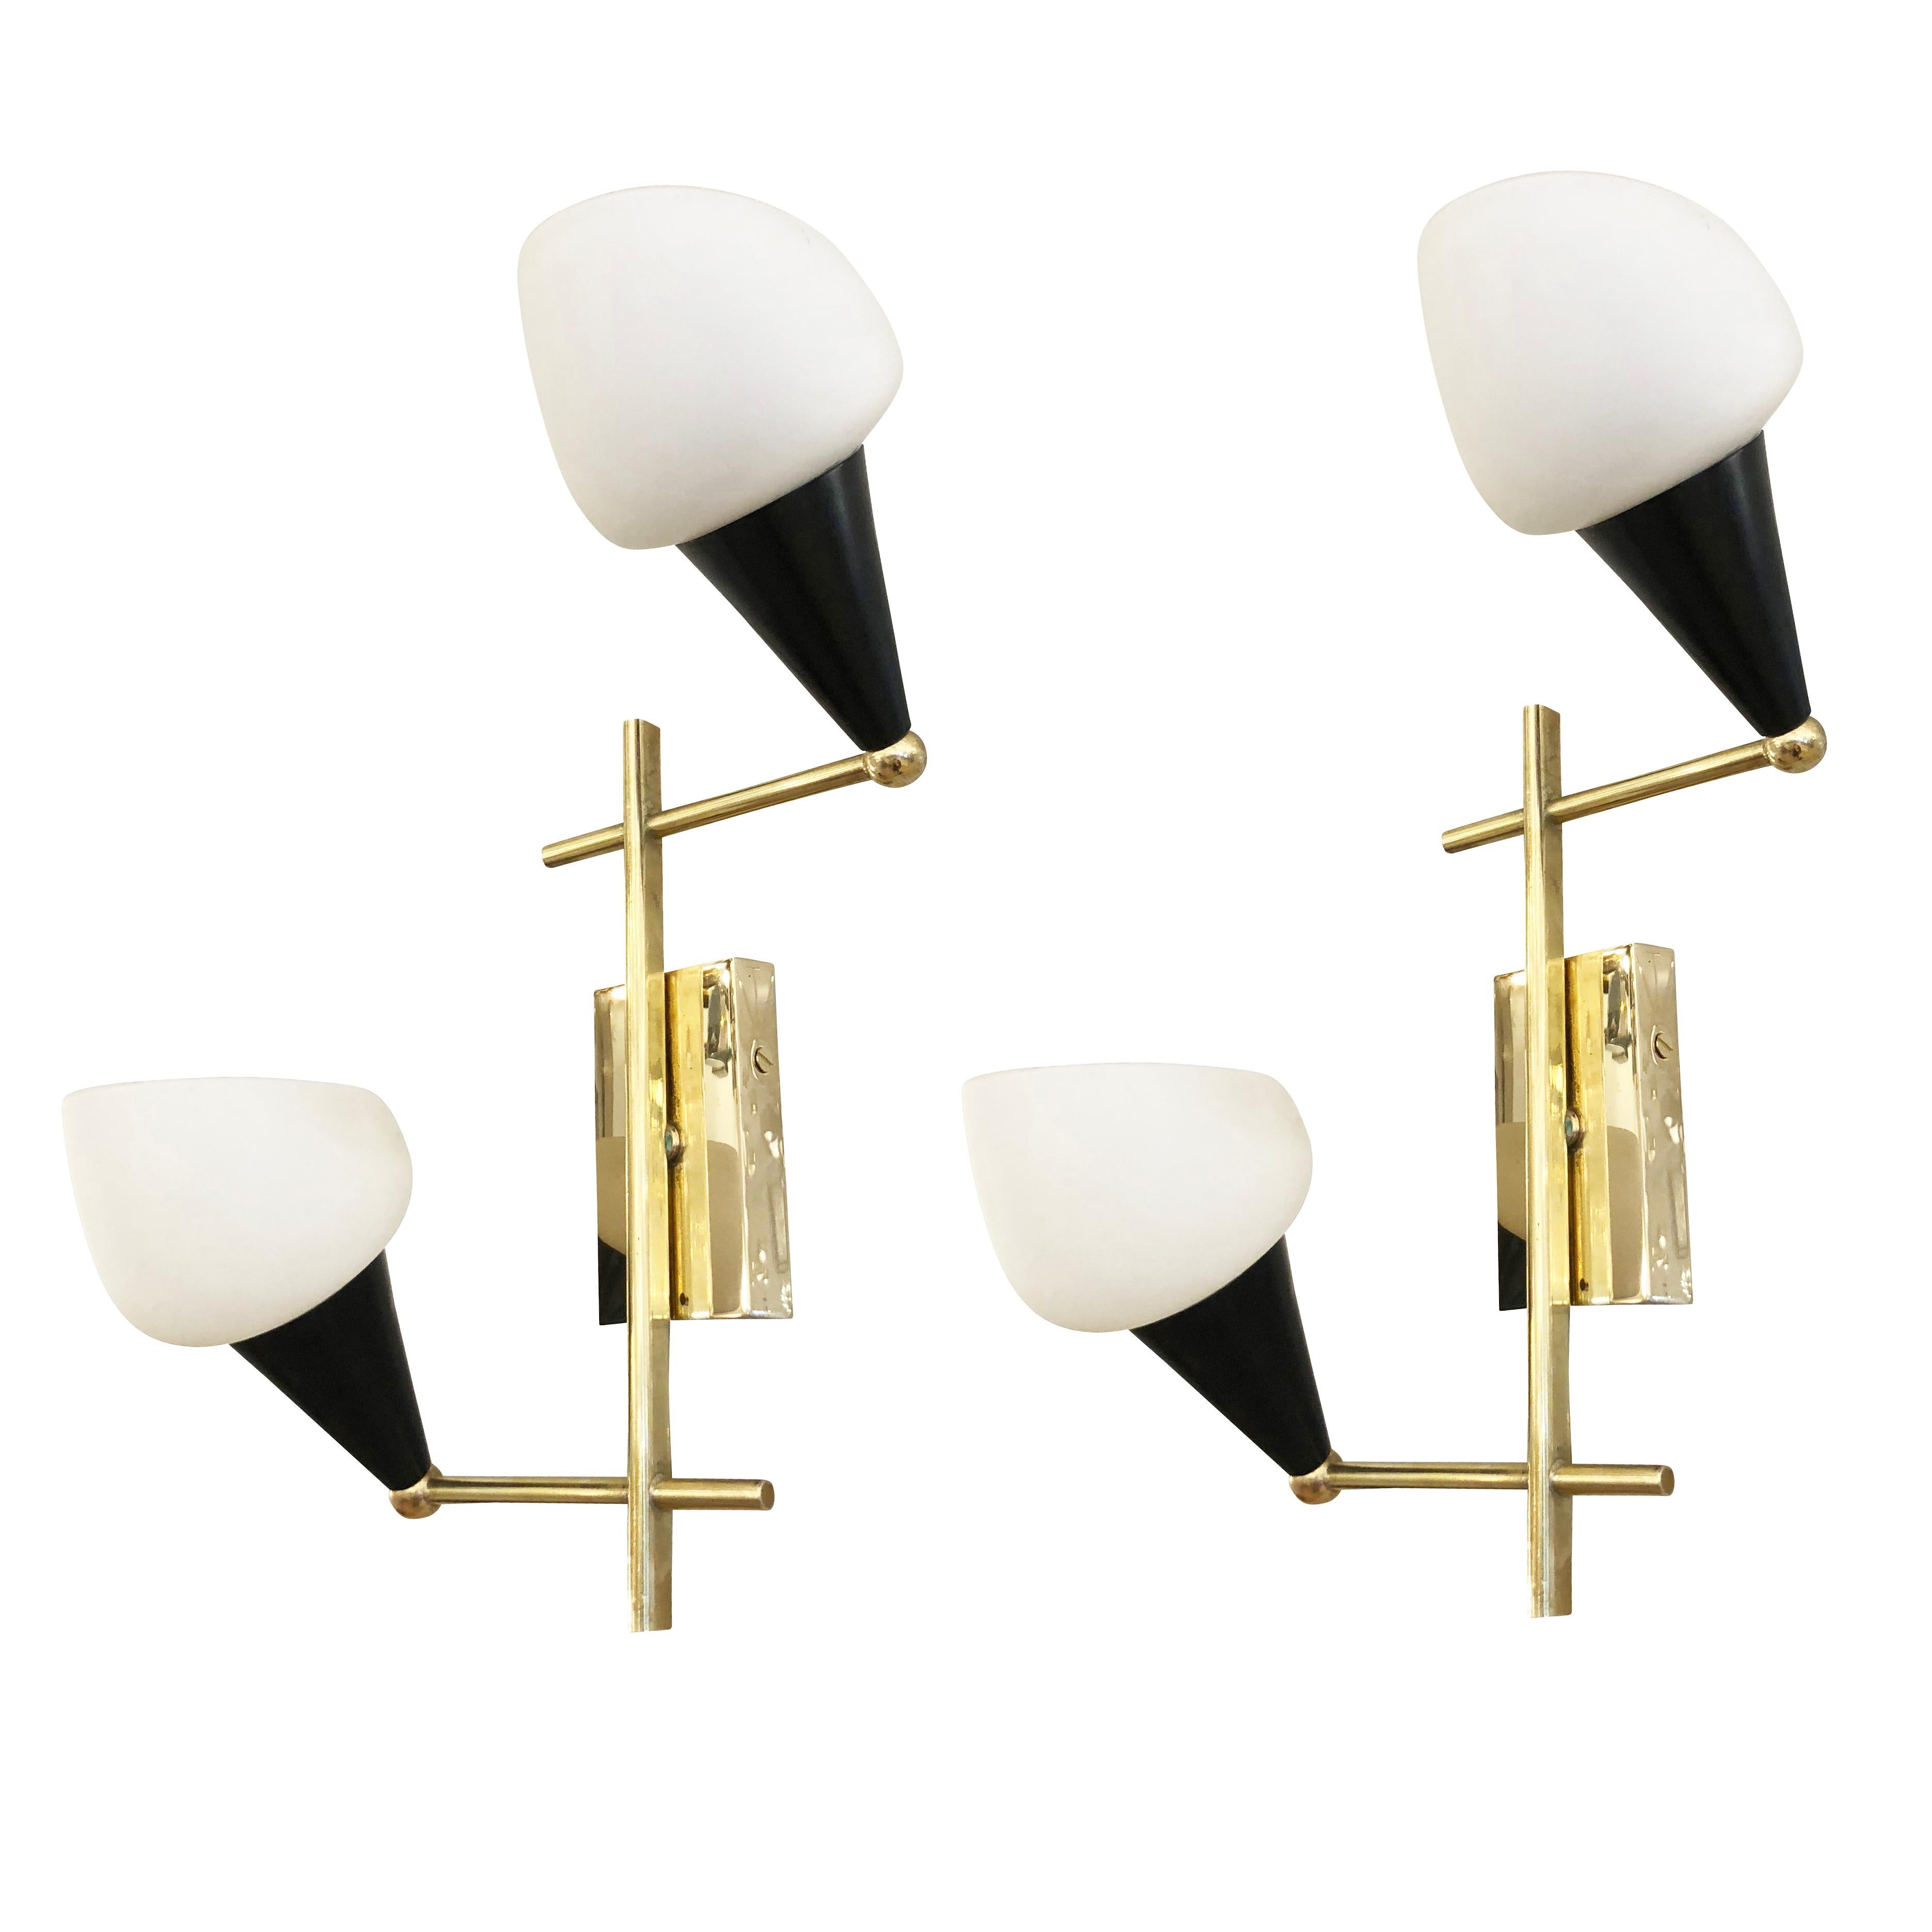 Pair of Italian midcentury wall lights with staggered frosted glass shades on a brass and black lacquered frame. Each holds two candelabra sockets.

Condition: Excellent vintage condition, minor wear consistent with age and use

Measures: Width